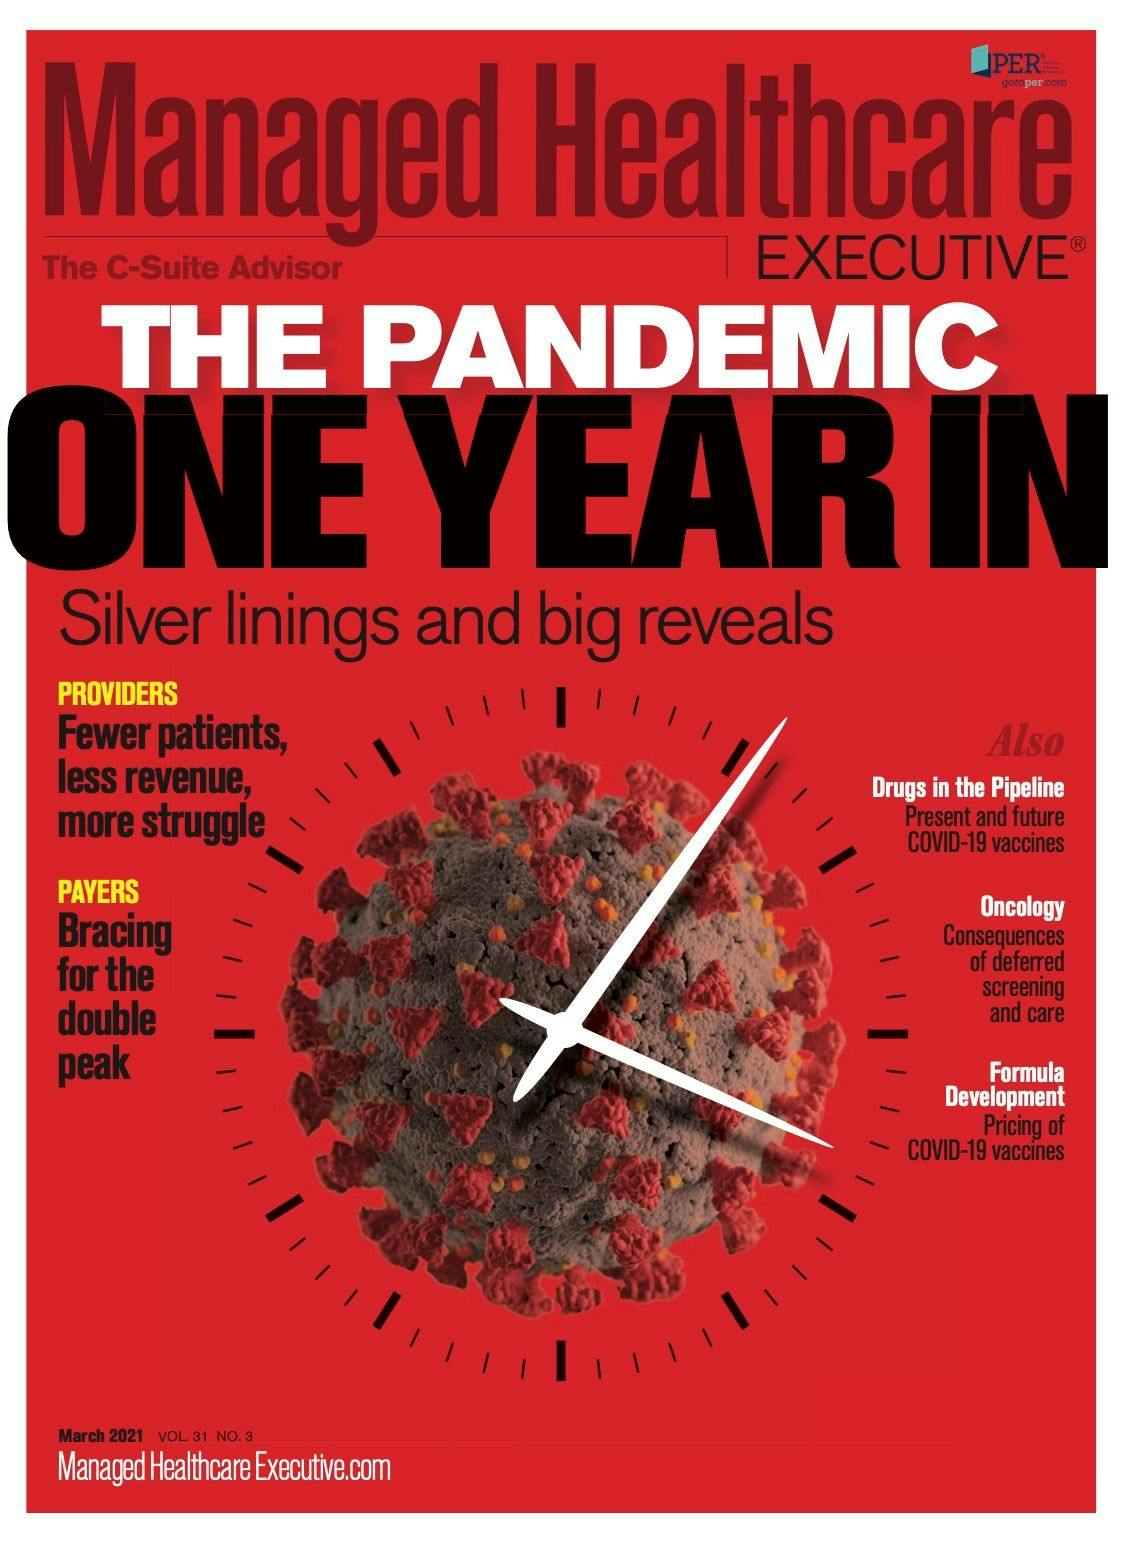 The Pandemic One Year in: The Silver Linings and Big Reveals